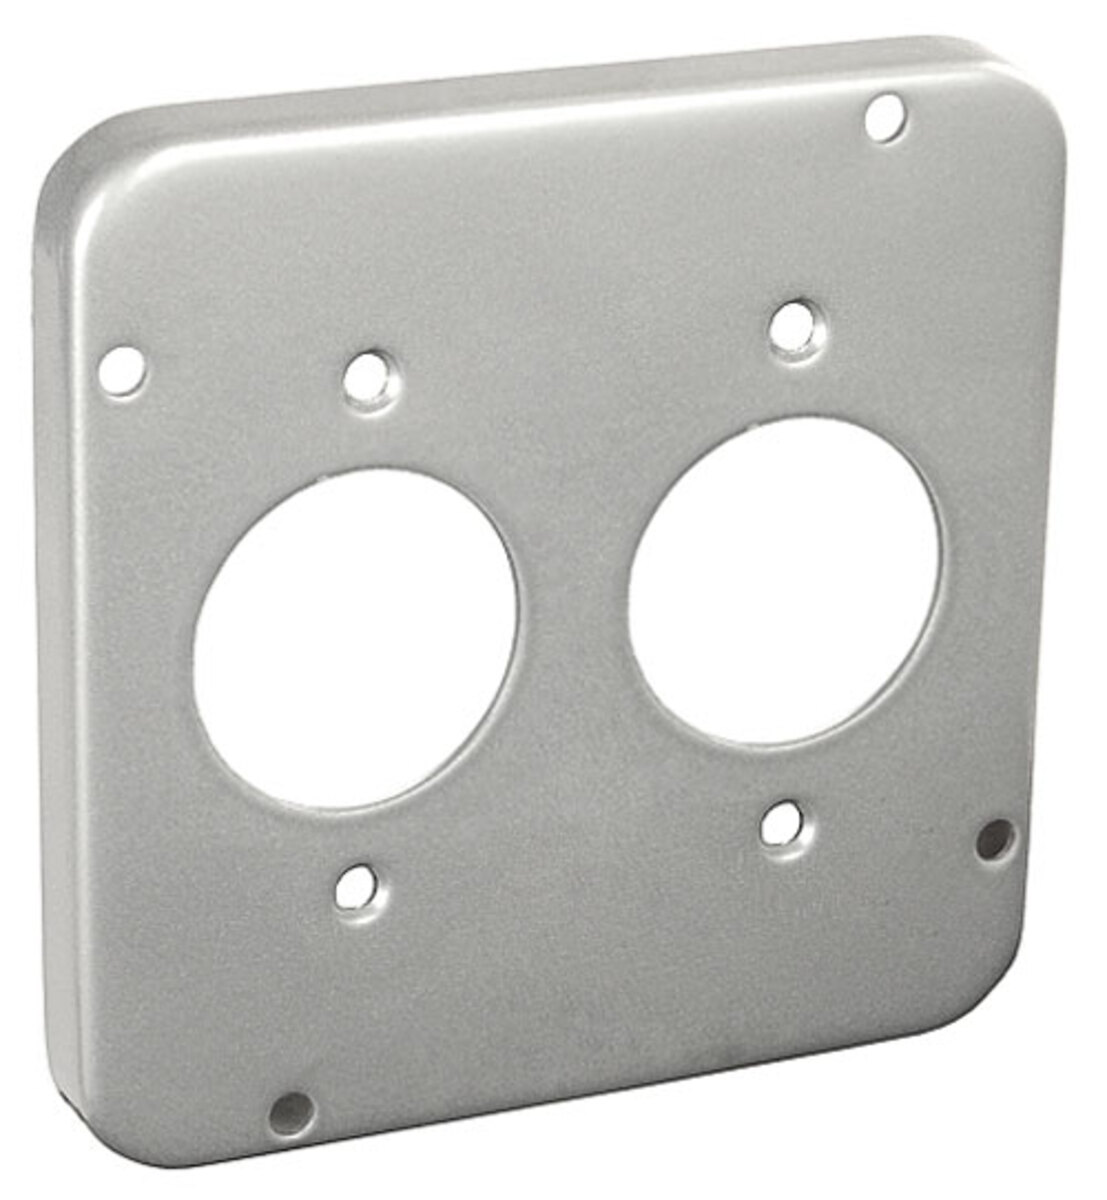 4-11/16" Square Industrial Surface Cover, 1/2" Raised - 1.62" Dia.